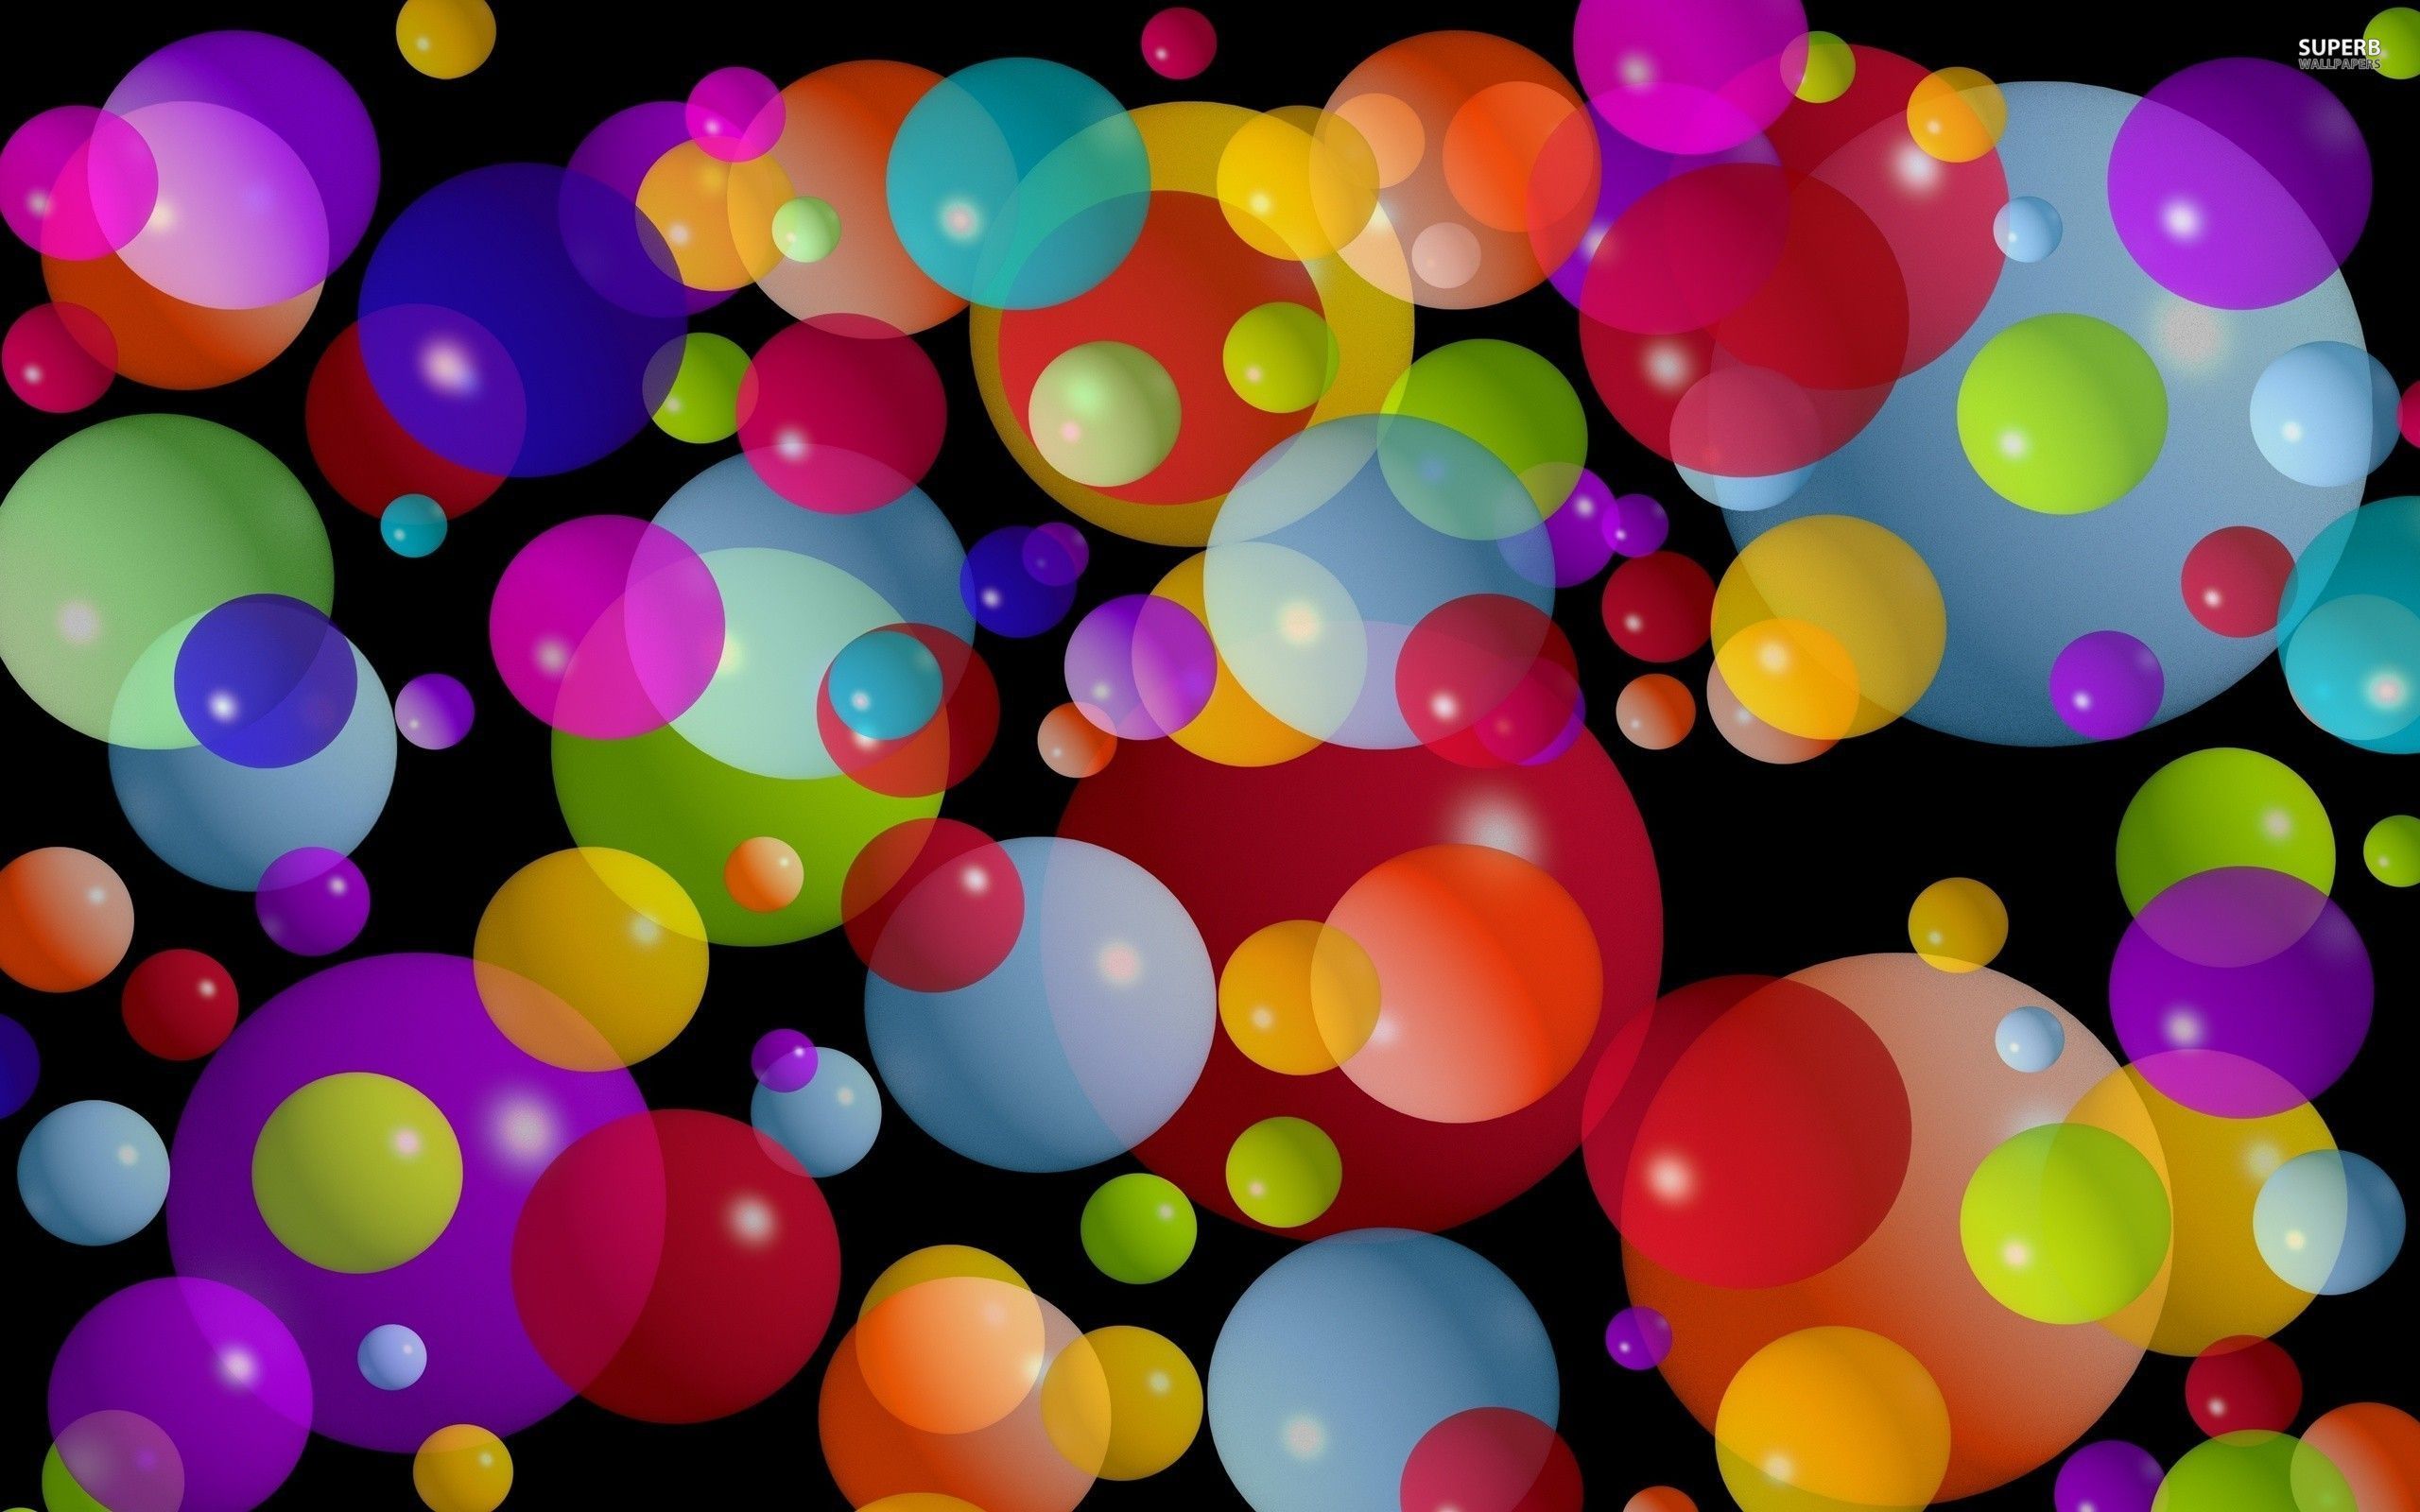 Blurred curves and bubbles wallpaper - Abstract wallpapers - #25133